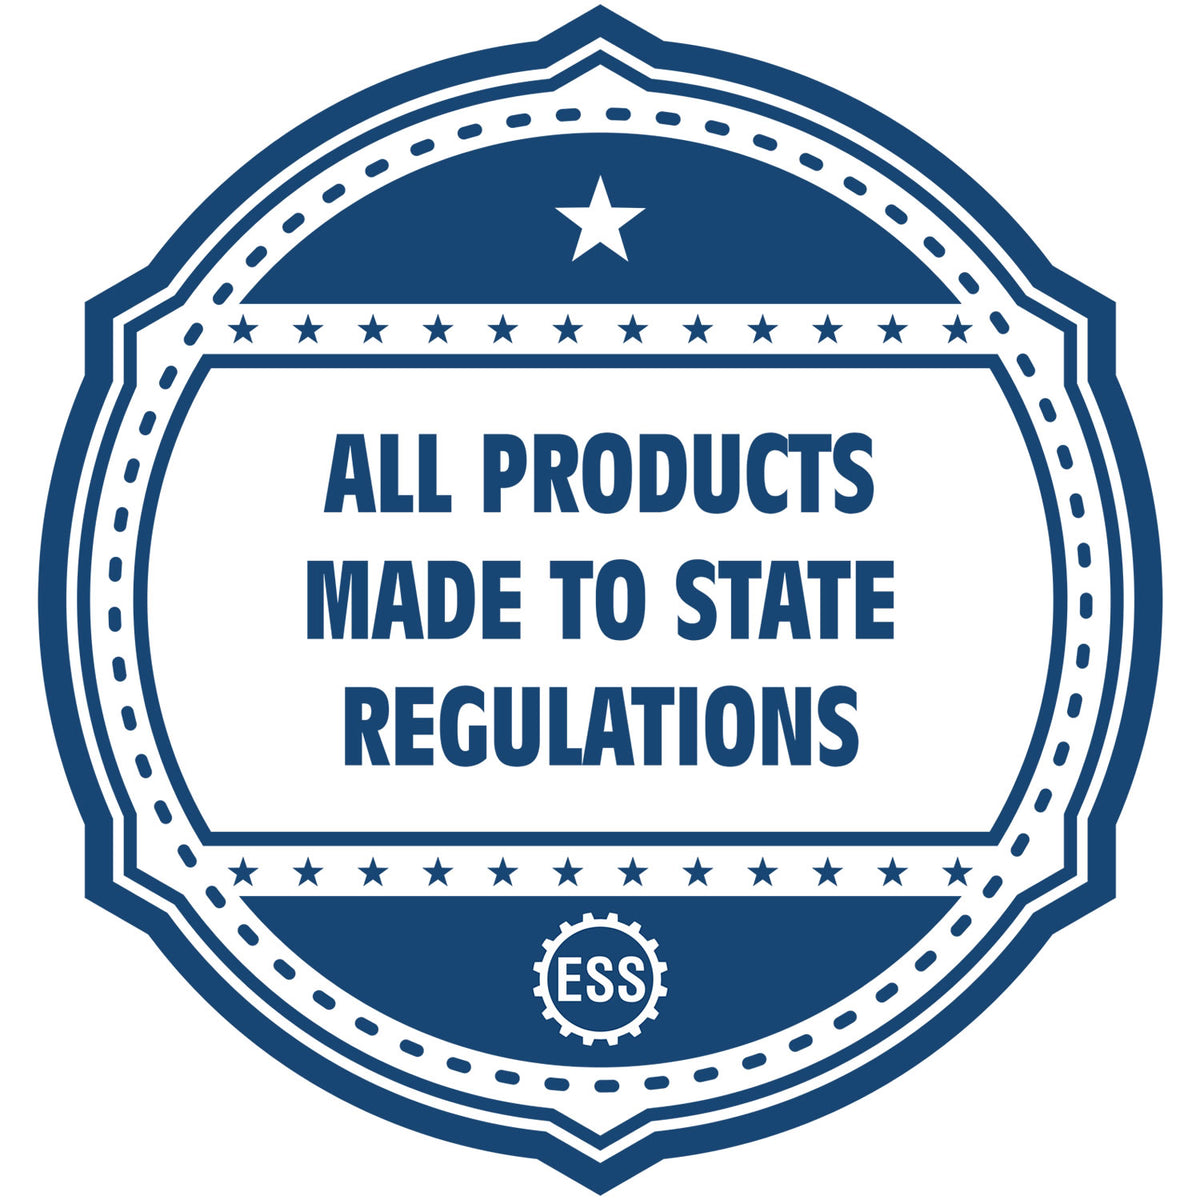 An icon or badge element for the State of Tennessee Soft Land Surveyor Embossing Seal showing that this product is made in compliance with state regulations.